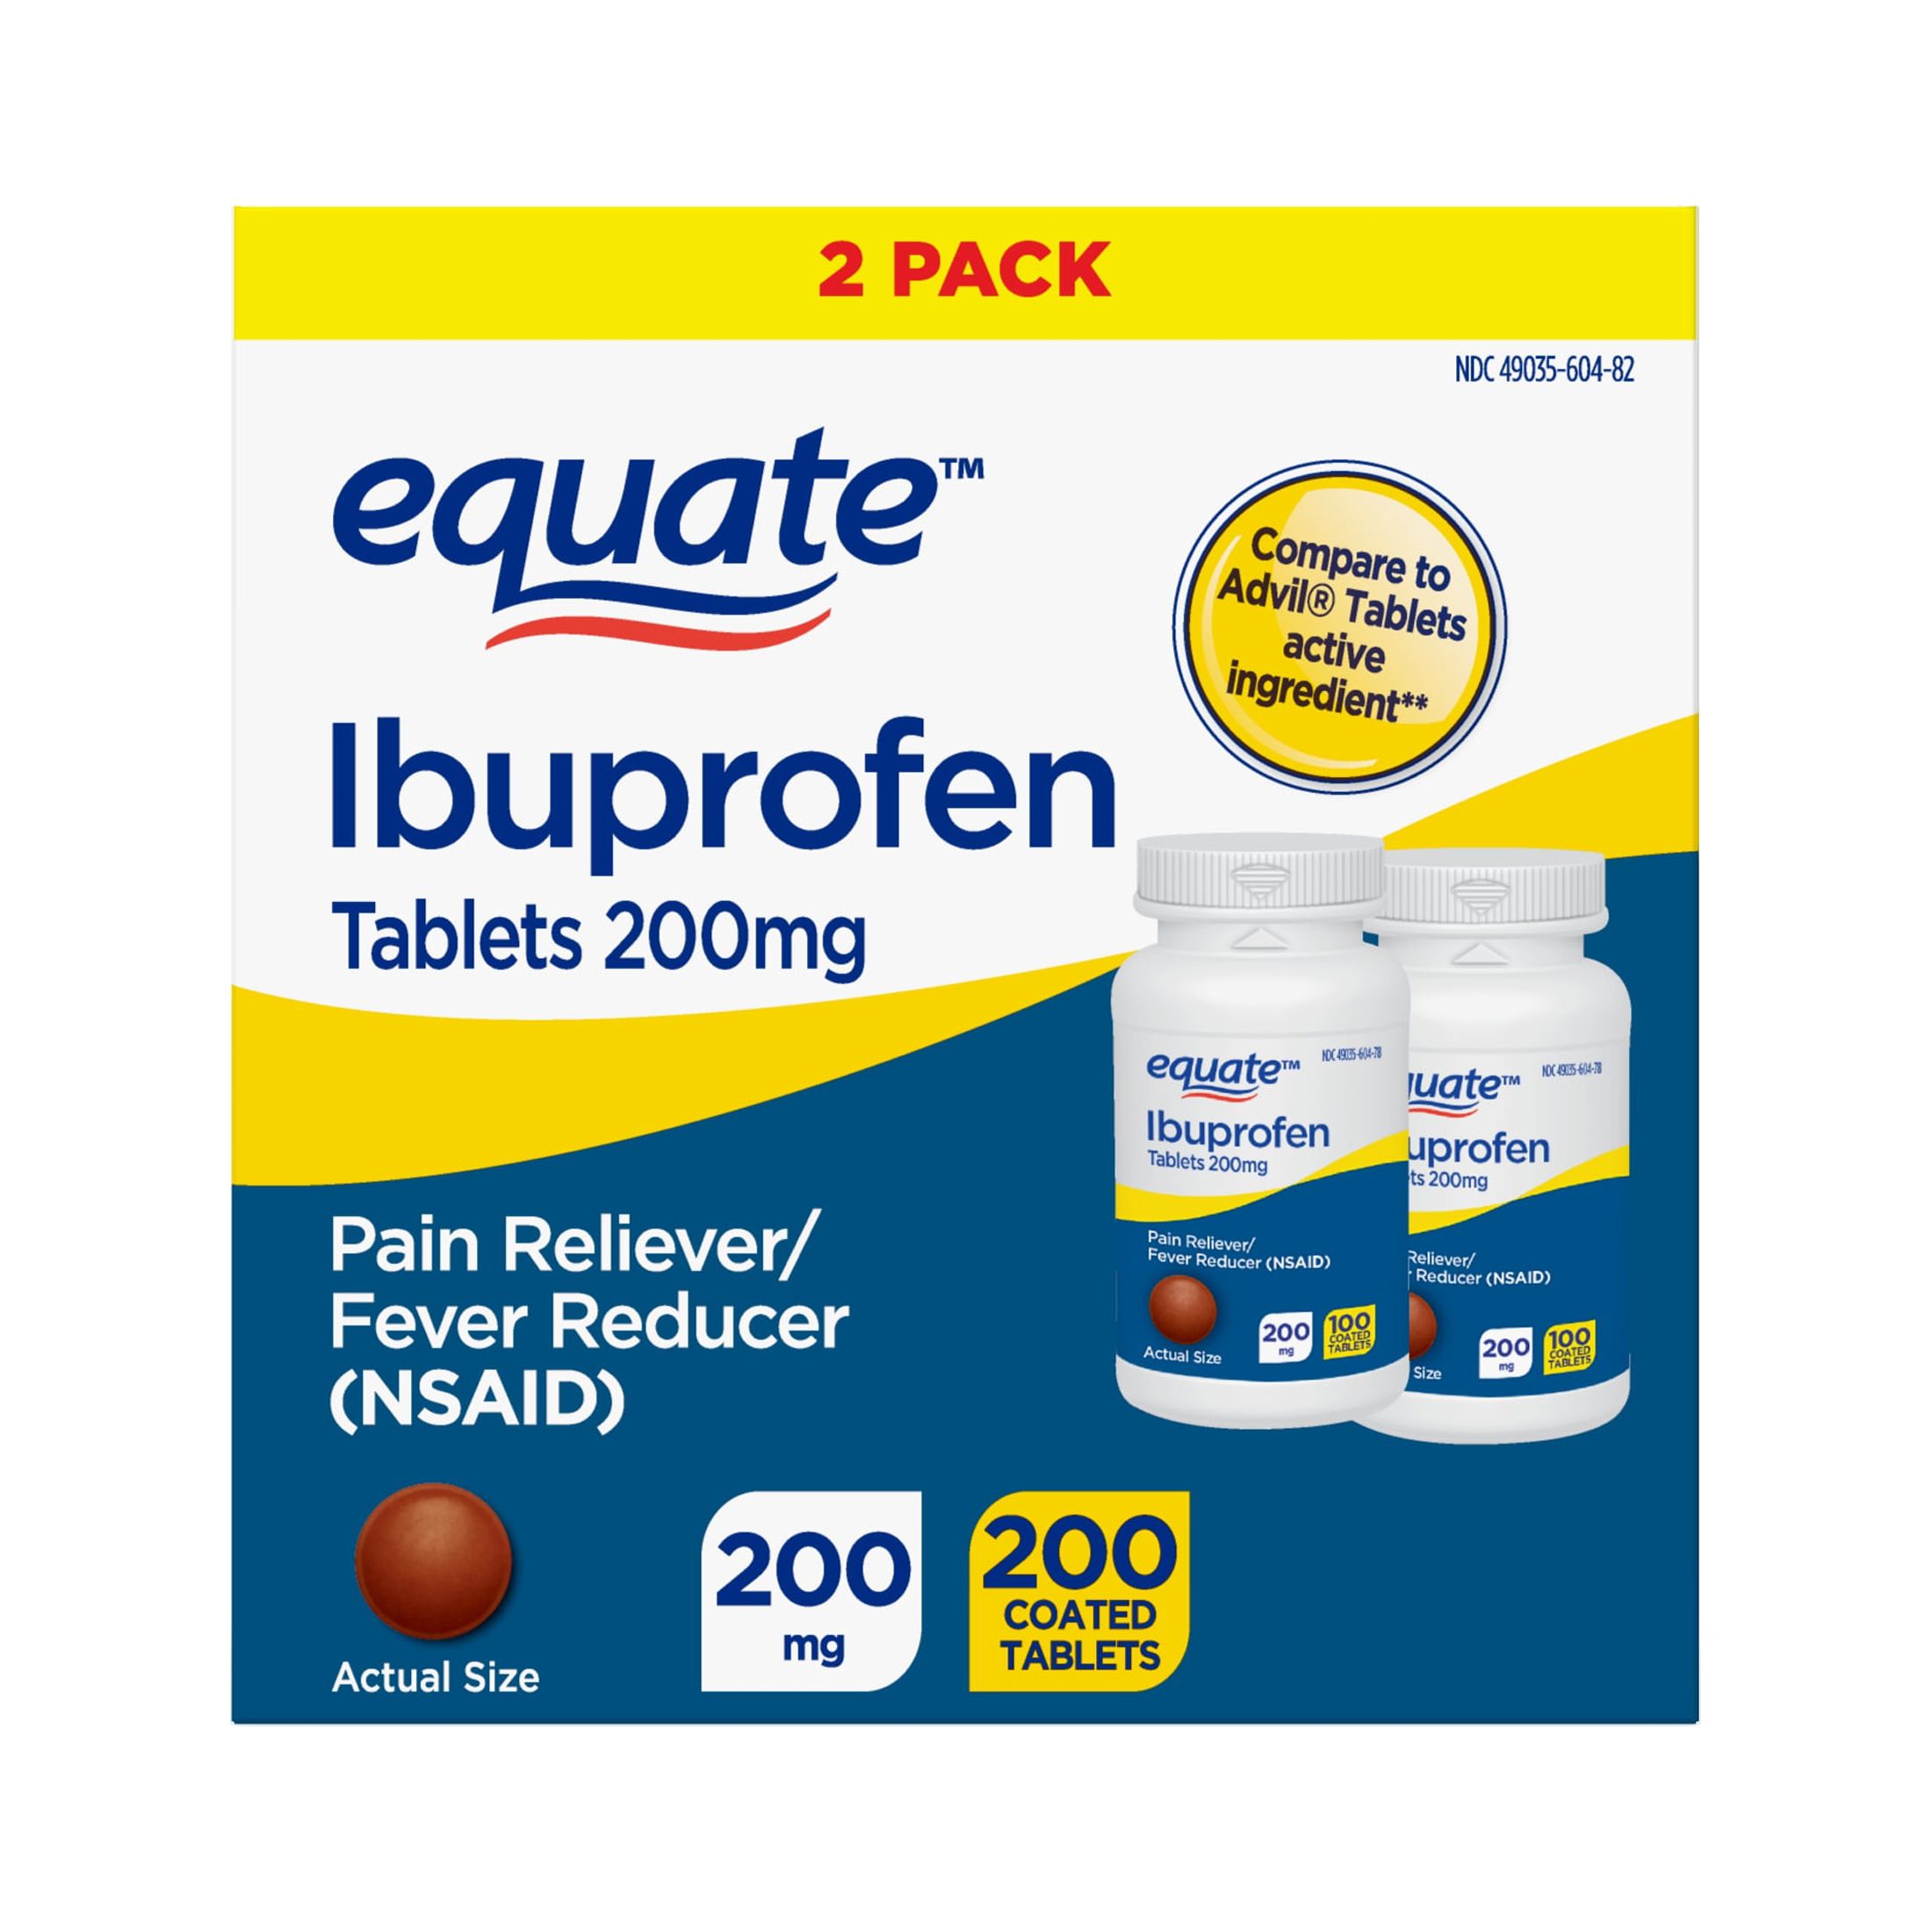 Equate Ibuprofen Tablets 200 mg, Pain Reliever/Fever Reducer, 2 Pack, 200 Count - image 1 of 9